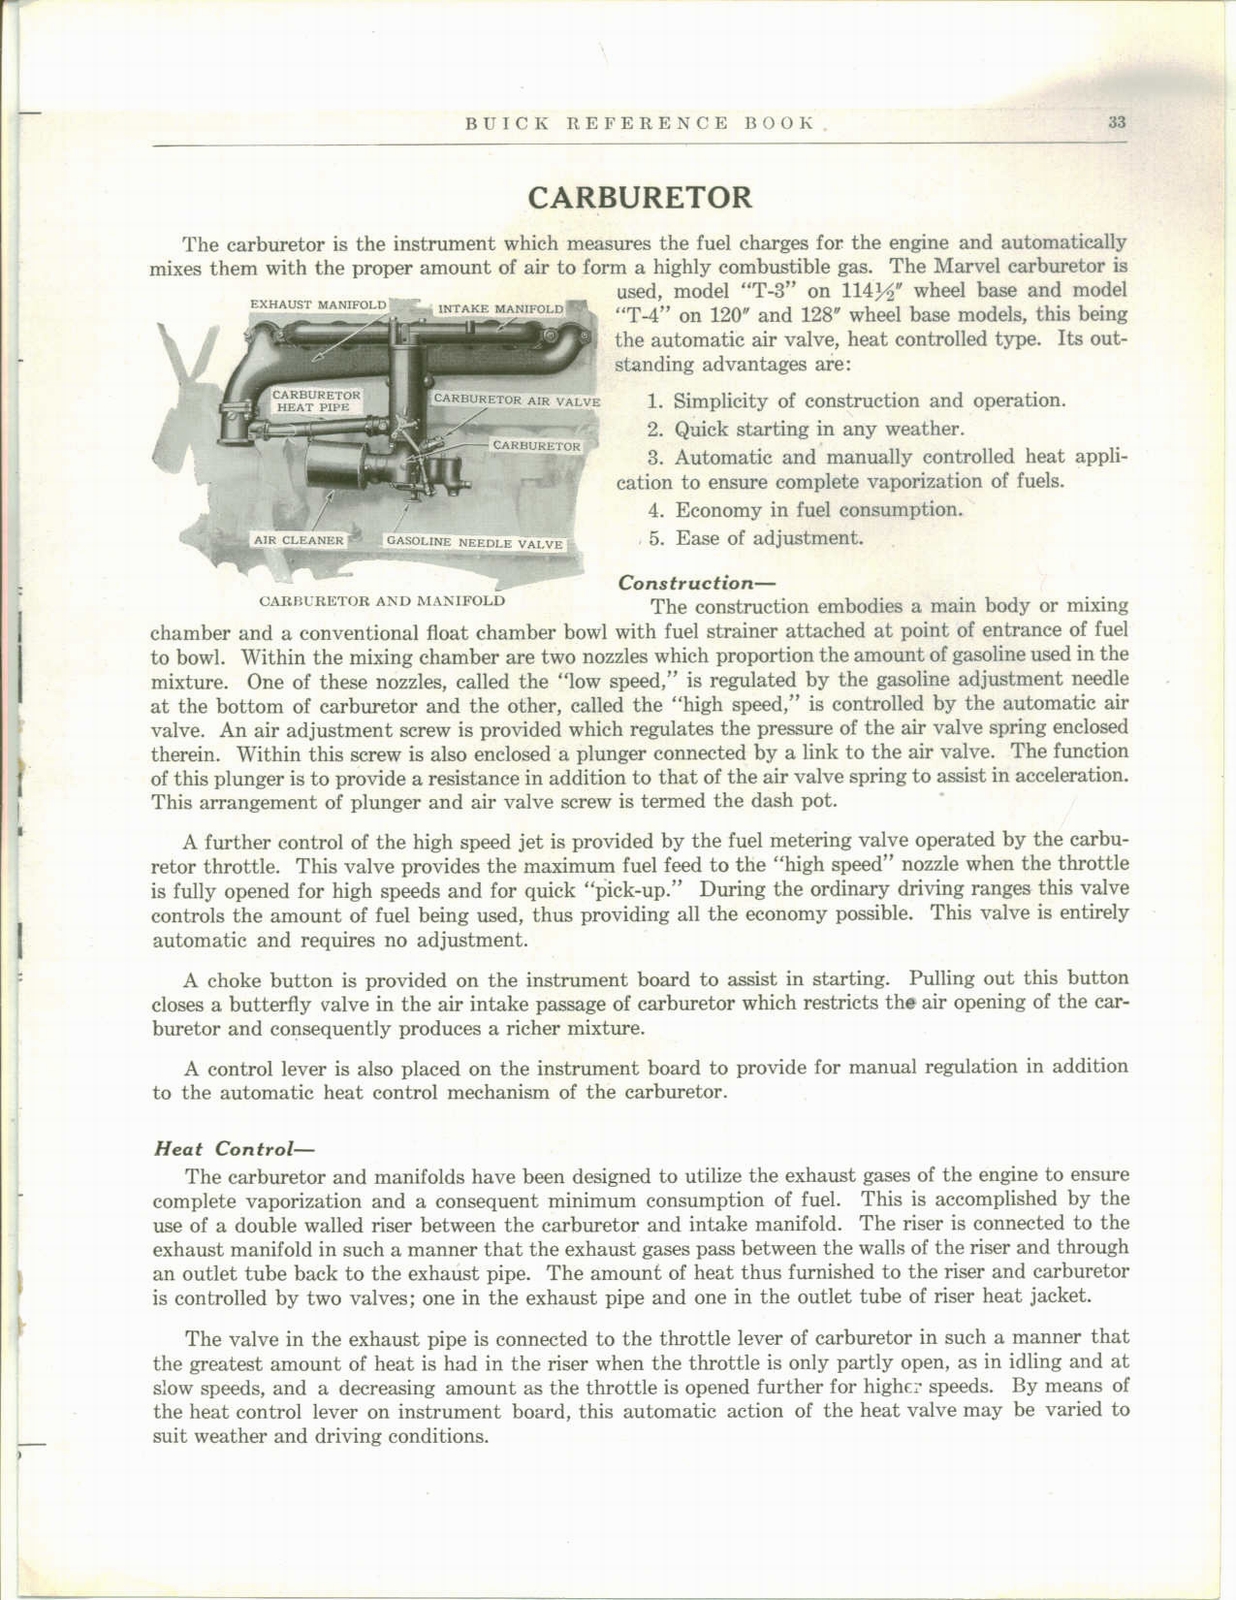 n_1928 Buick Reference Book-33.jpg